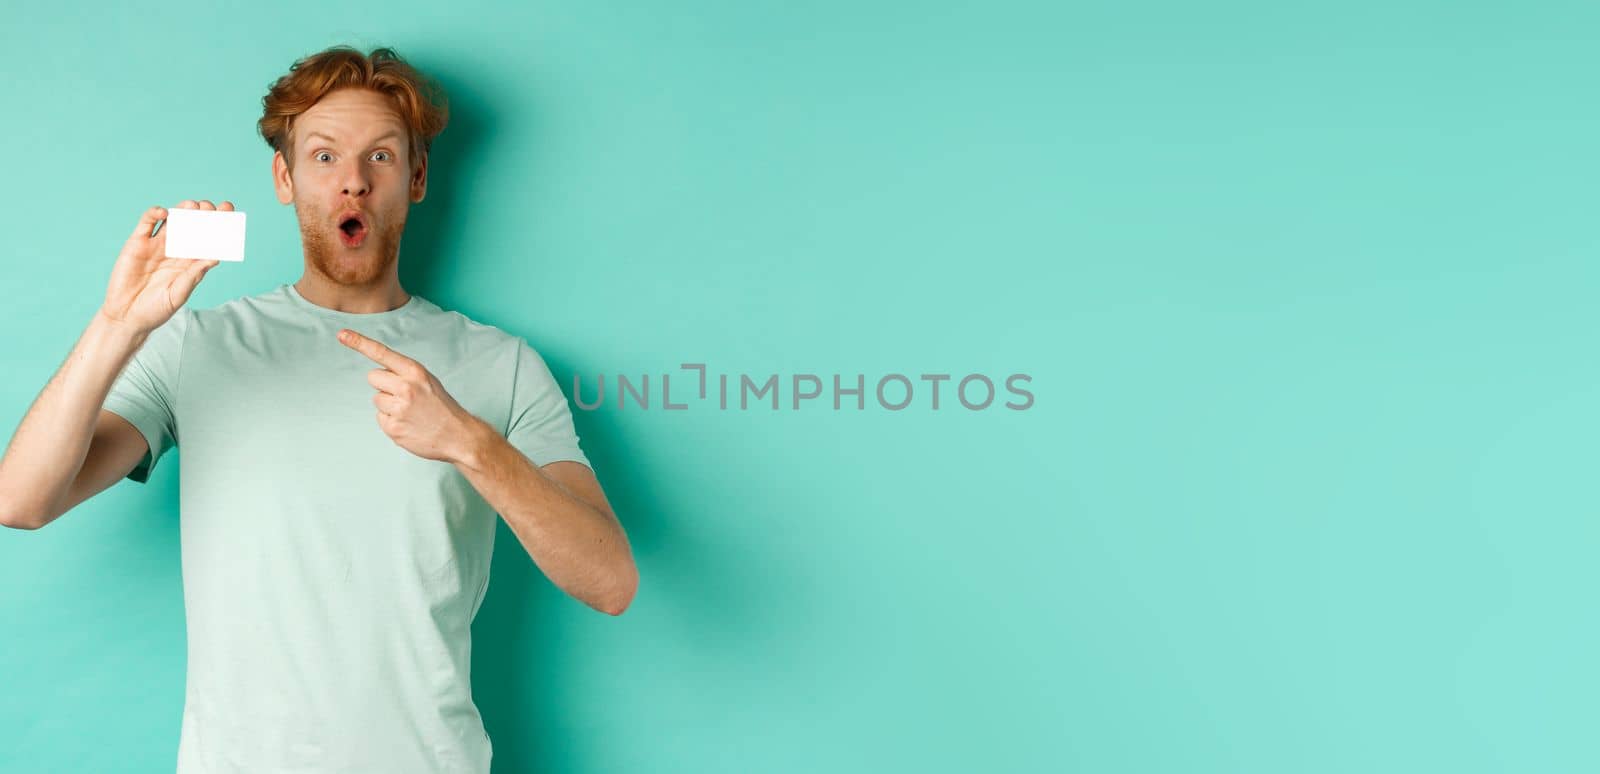 Shopping concept. Handsome redhead man in t-shirt showing plastic credit card and smiling, standing over turquoise background.